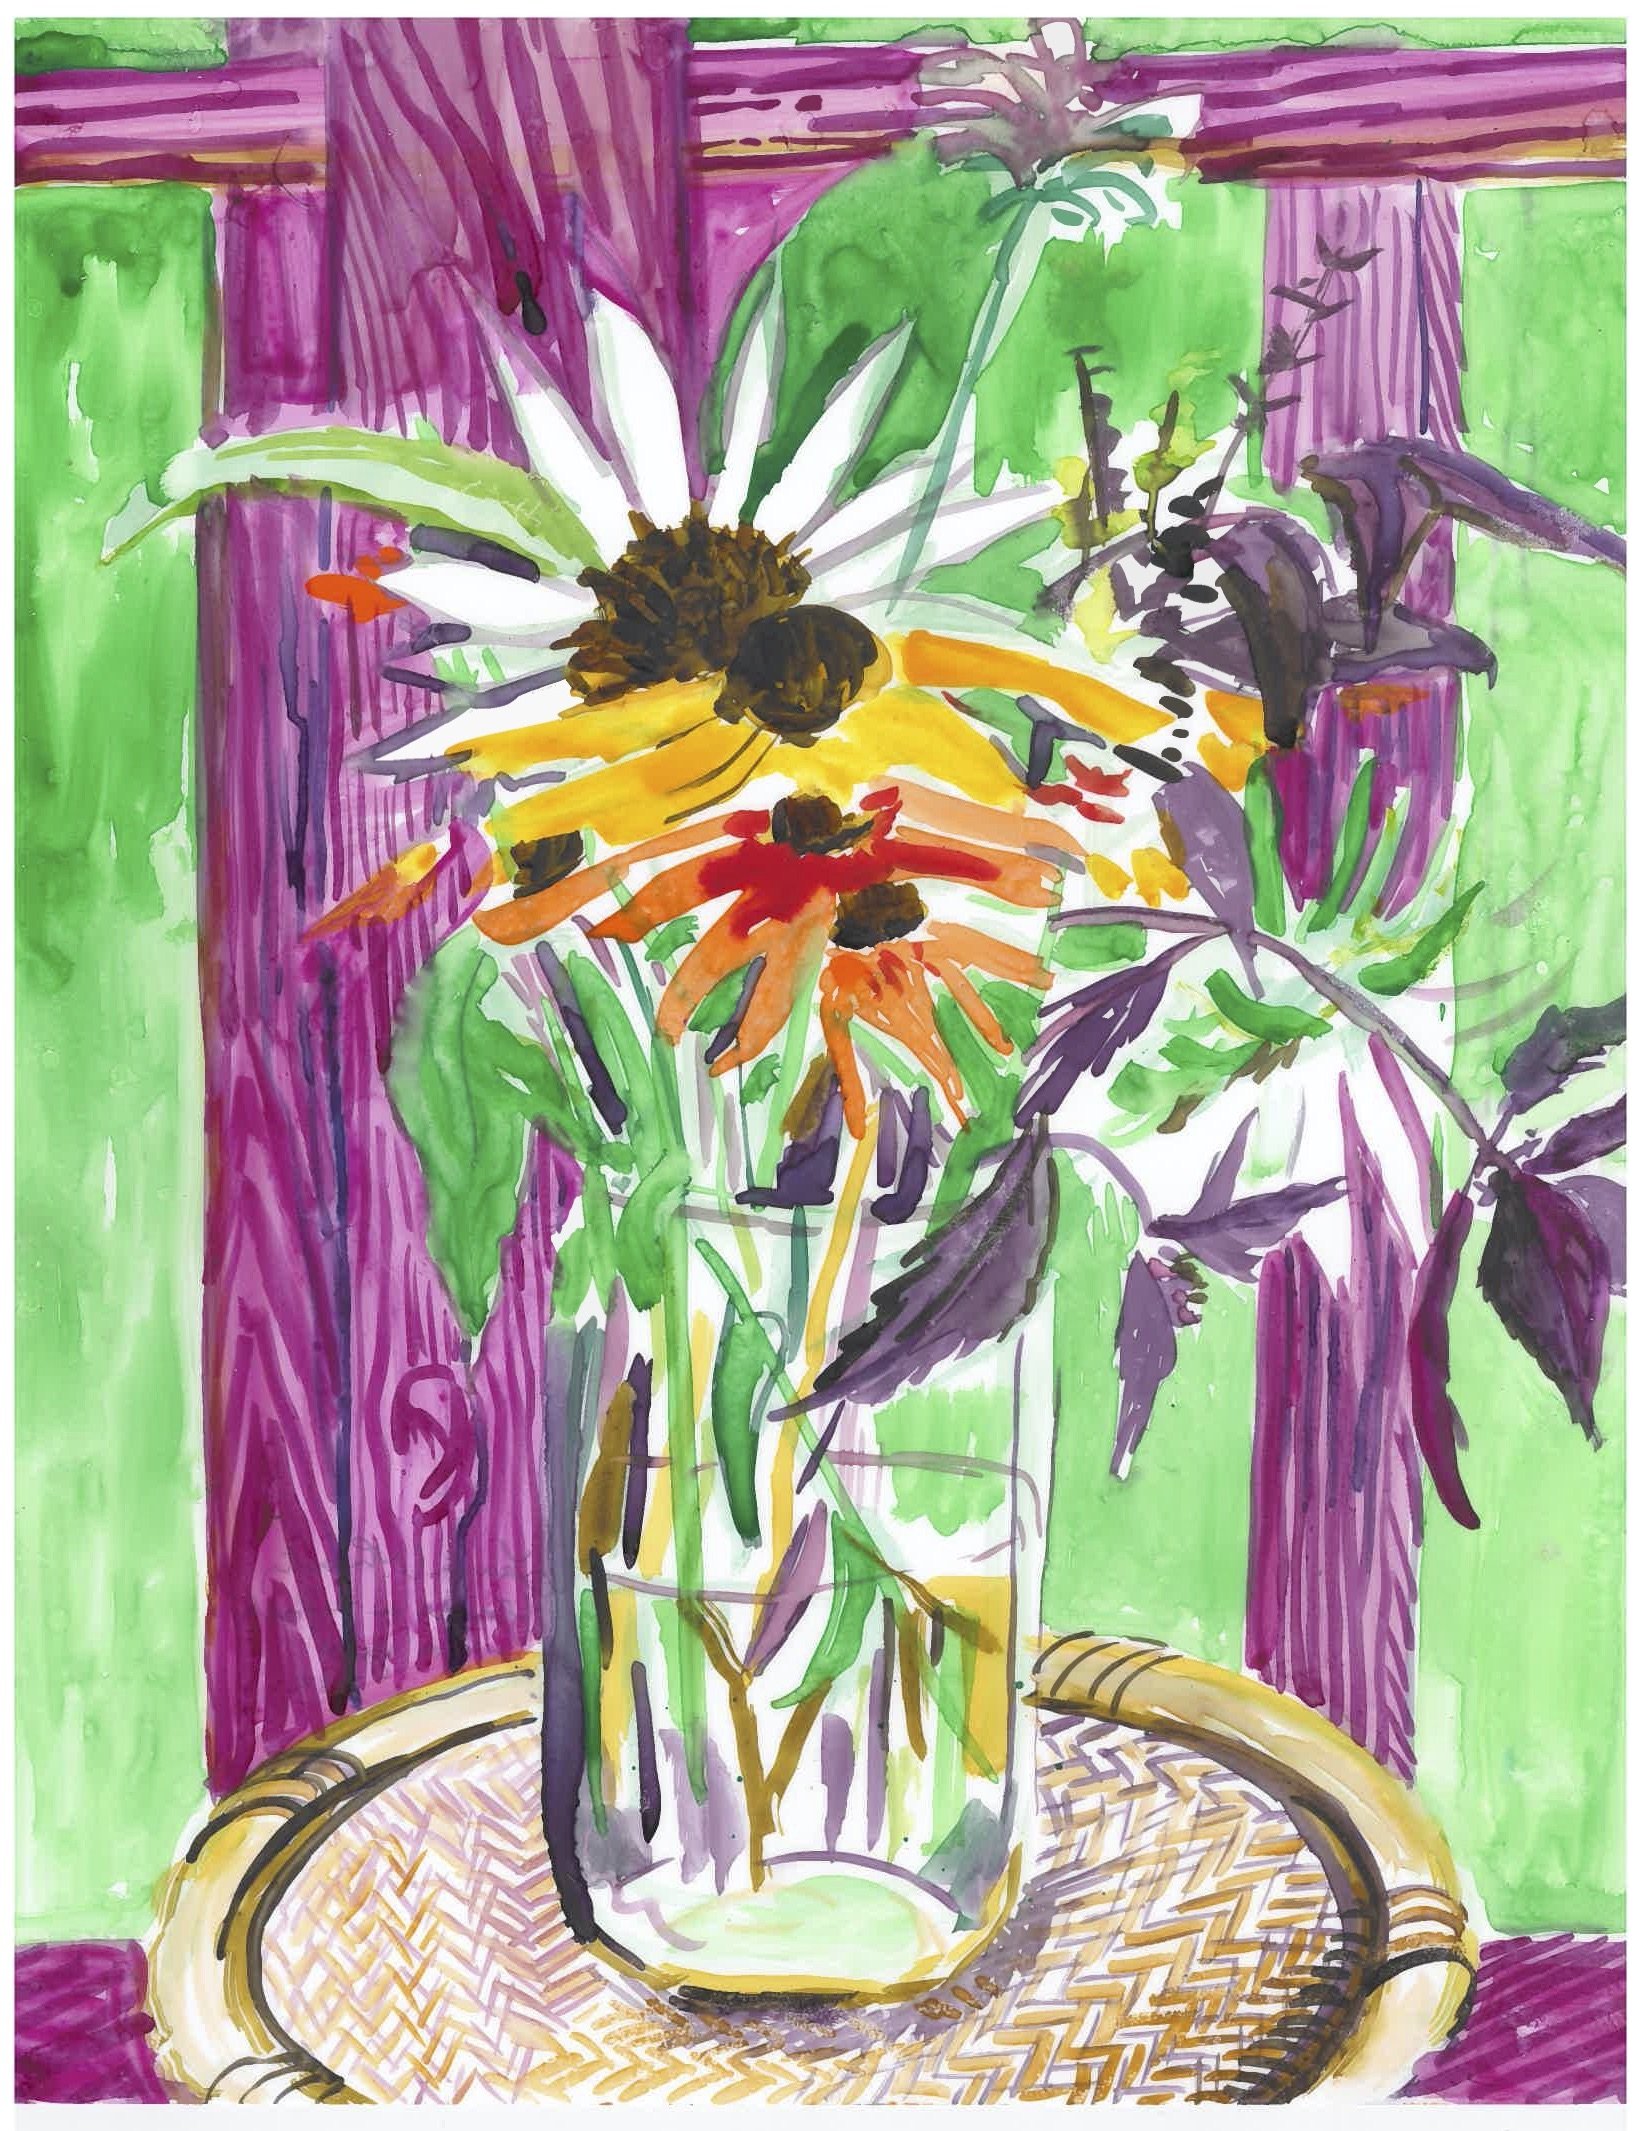   Lauren Whearty ,  Flowers on the Porch , 2022, watercolor on Yupo, 11 x 14" 